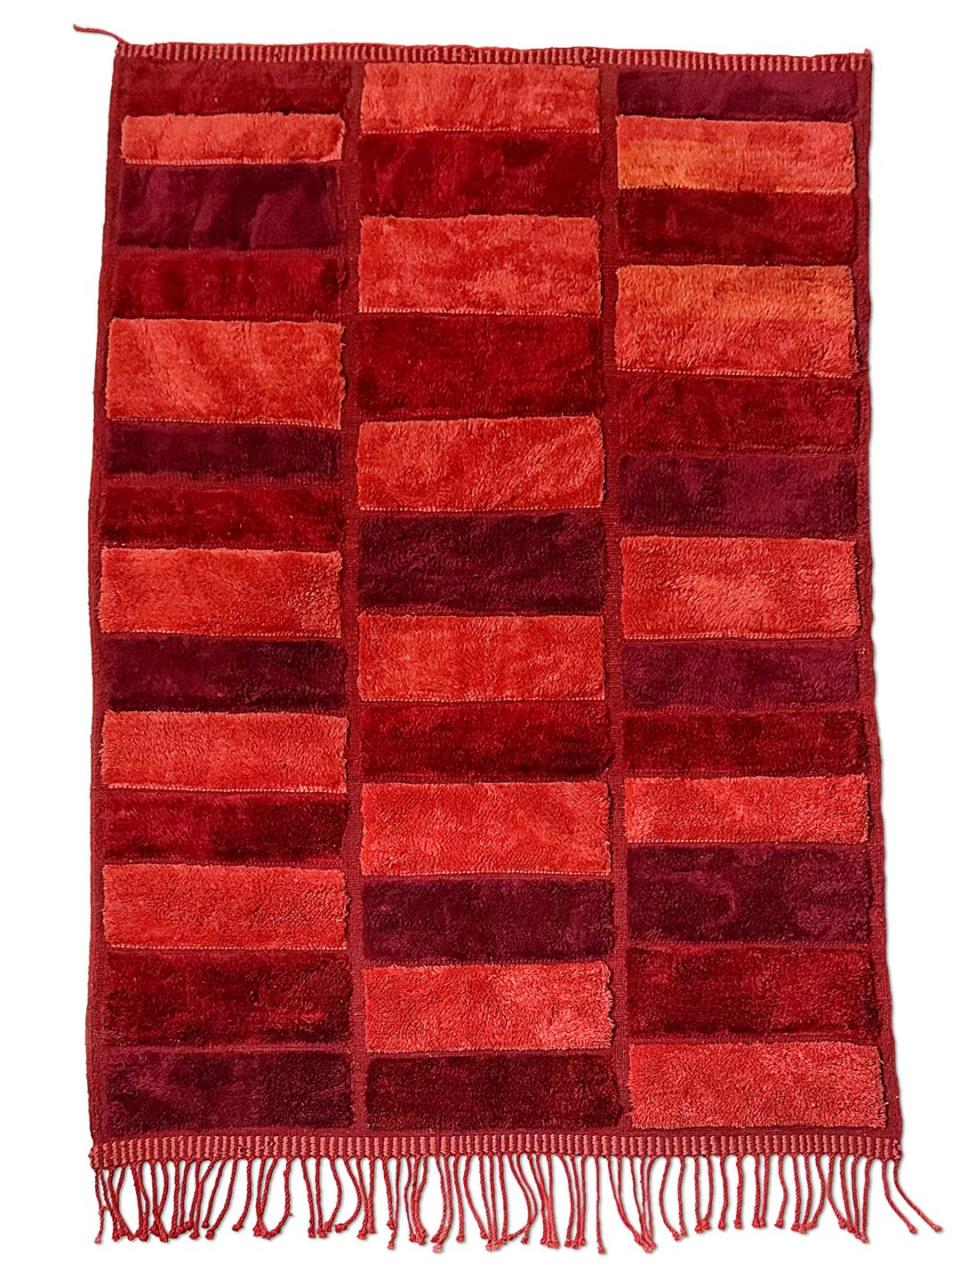 fringed plush rug in blocks of varying colors of red